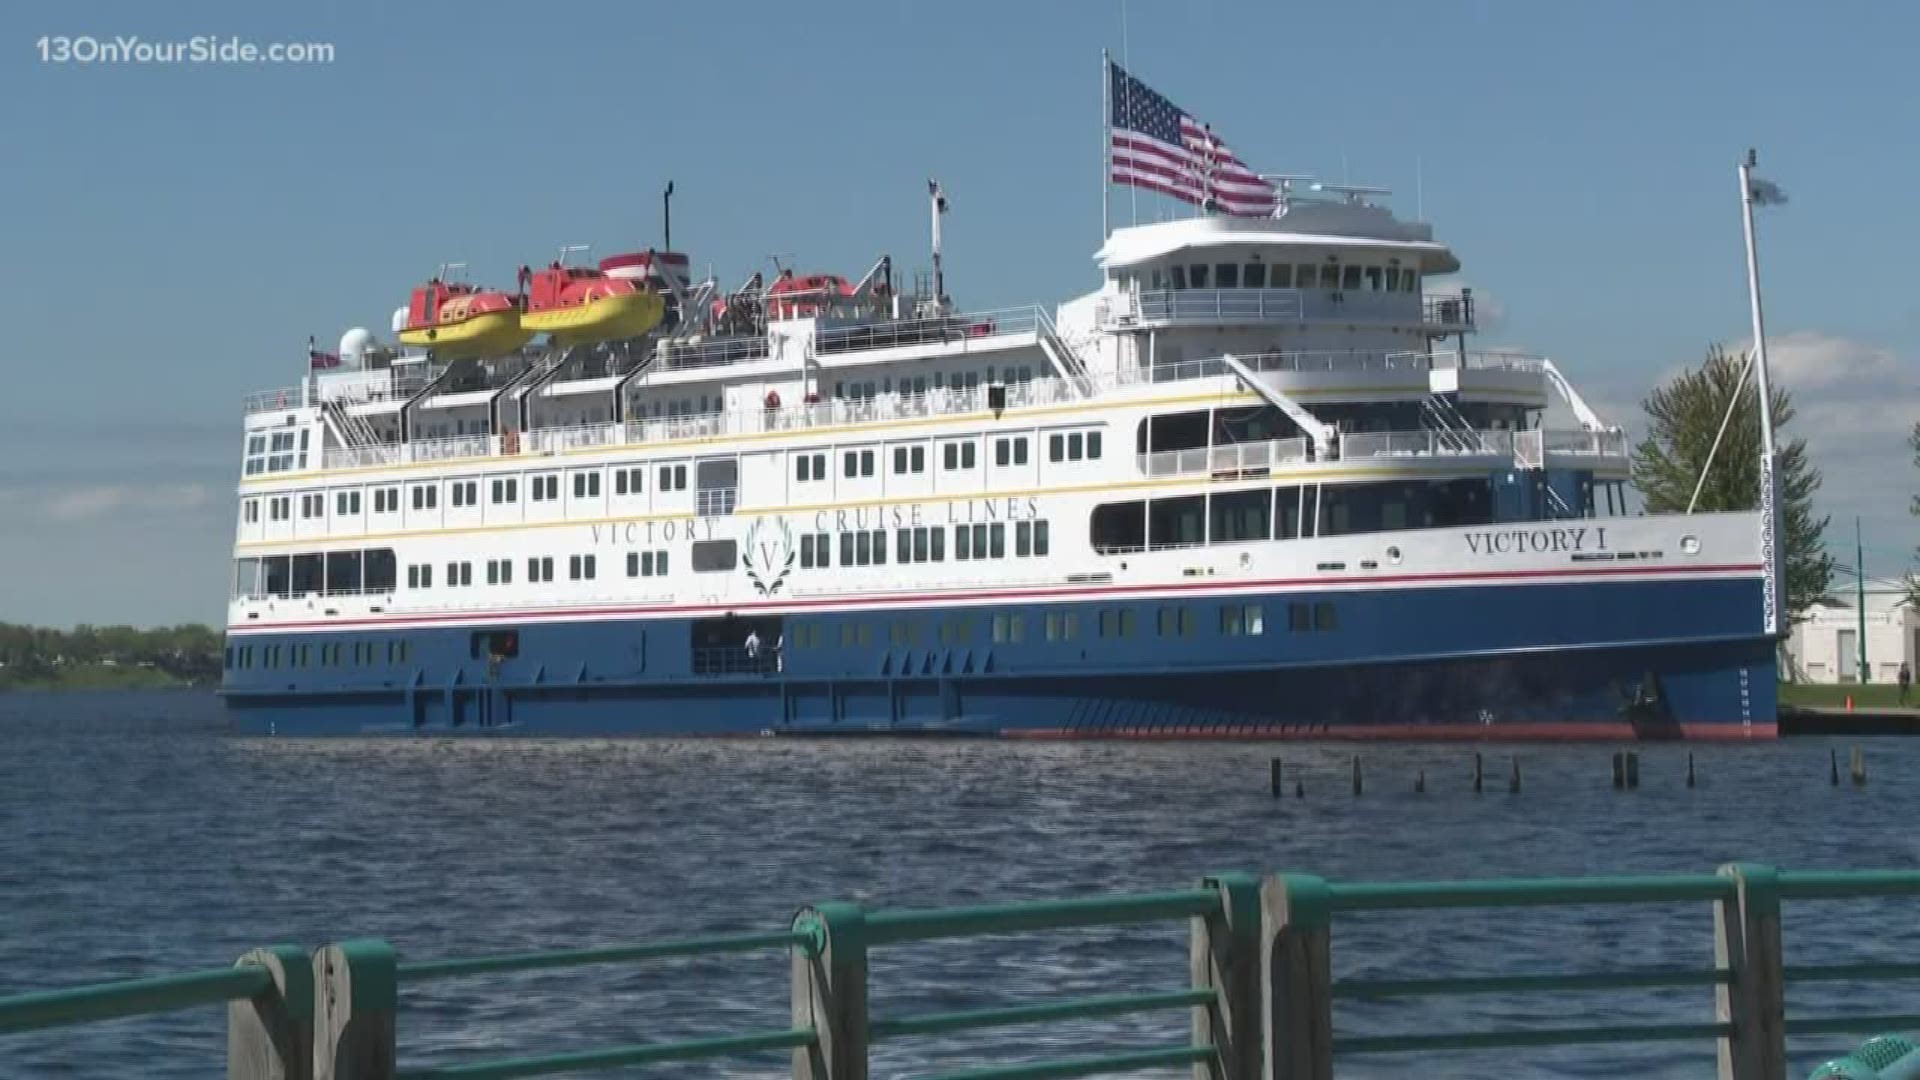 Muskegon cruise ship stops to double, with some days two in port at